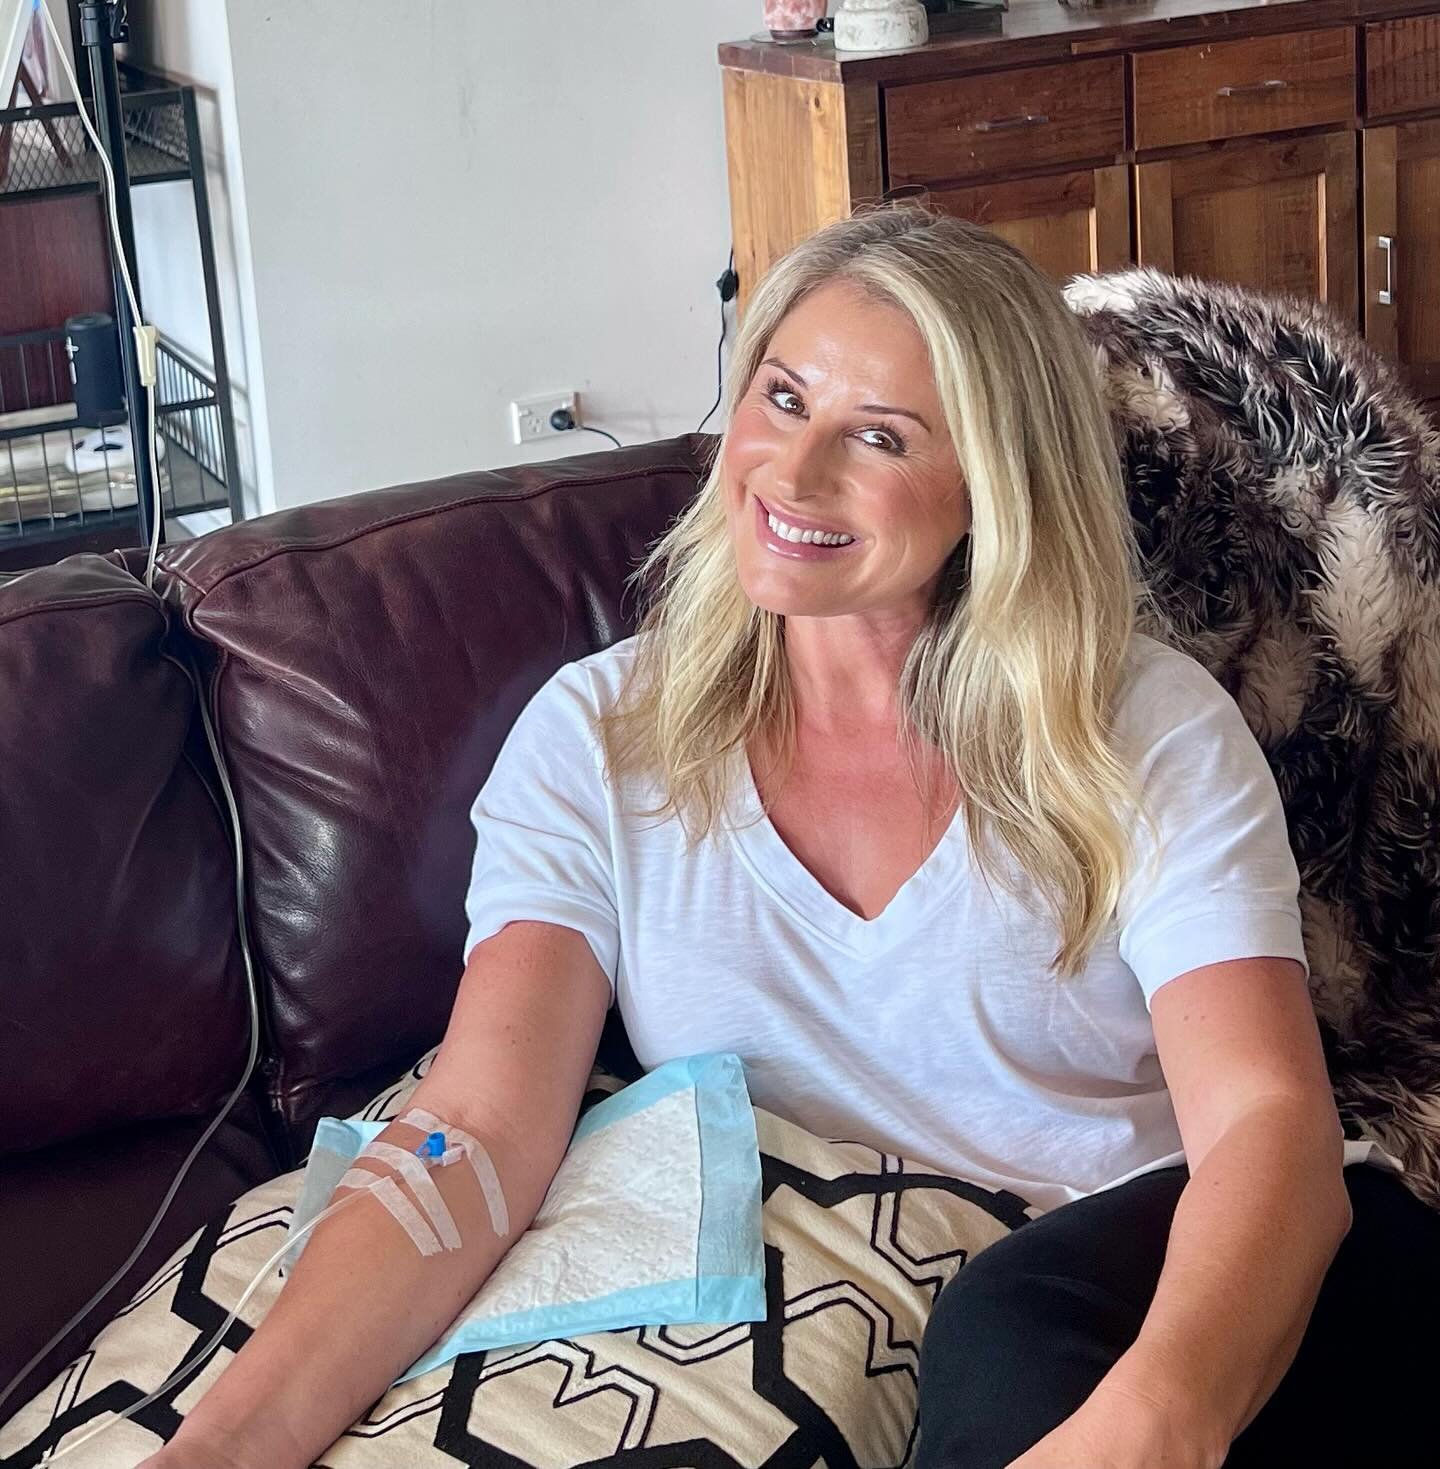 IV VITAMIN INFUSION 💗

Ahhhh I&rsquo;ve been wanting to try this for awhile now and I&rsquo;m SO glad I did! 

Yesterday, @thenutrientnurse.nz hooked me up to a Super Cocktail bag of High Dose Vitamin C, Magnesium, Vitamins B1, B2, B3, B5, B6, B12, 